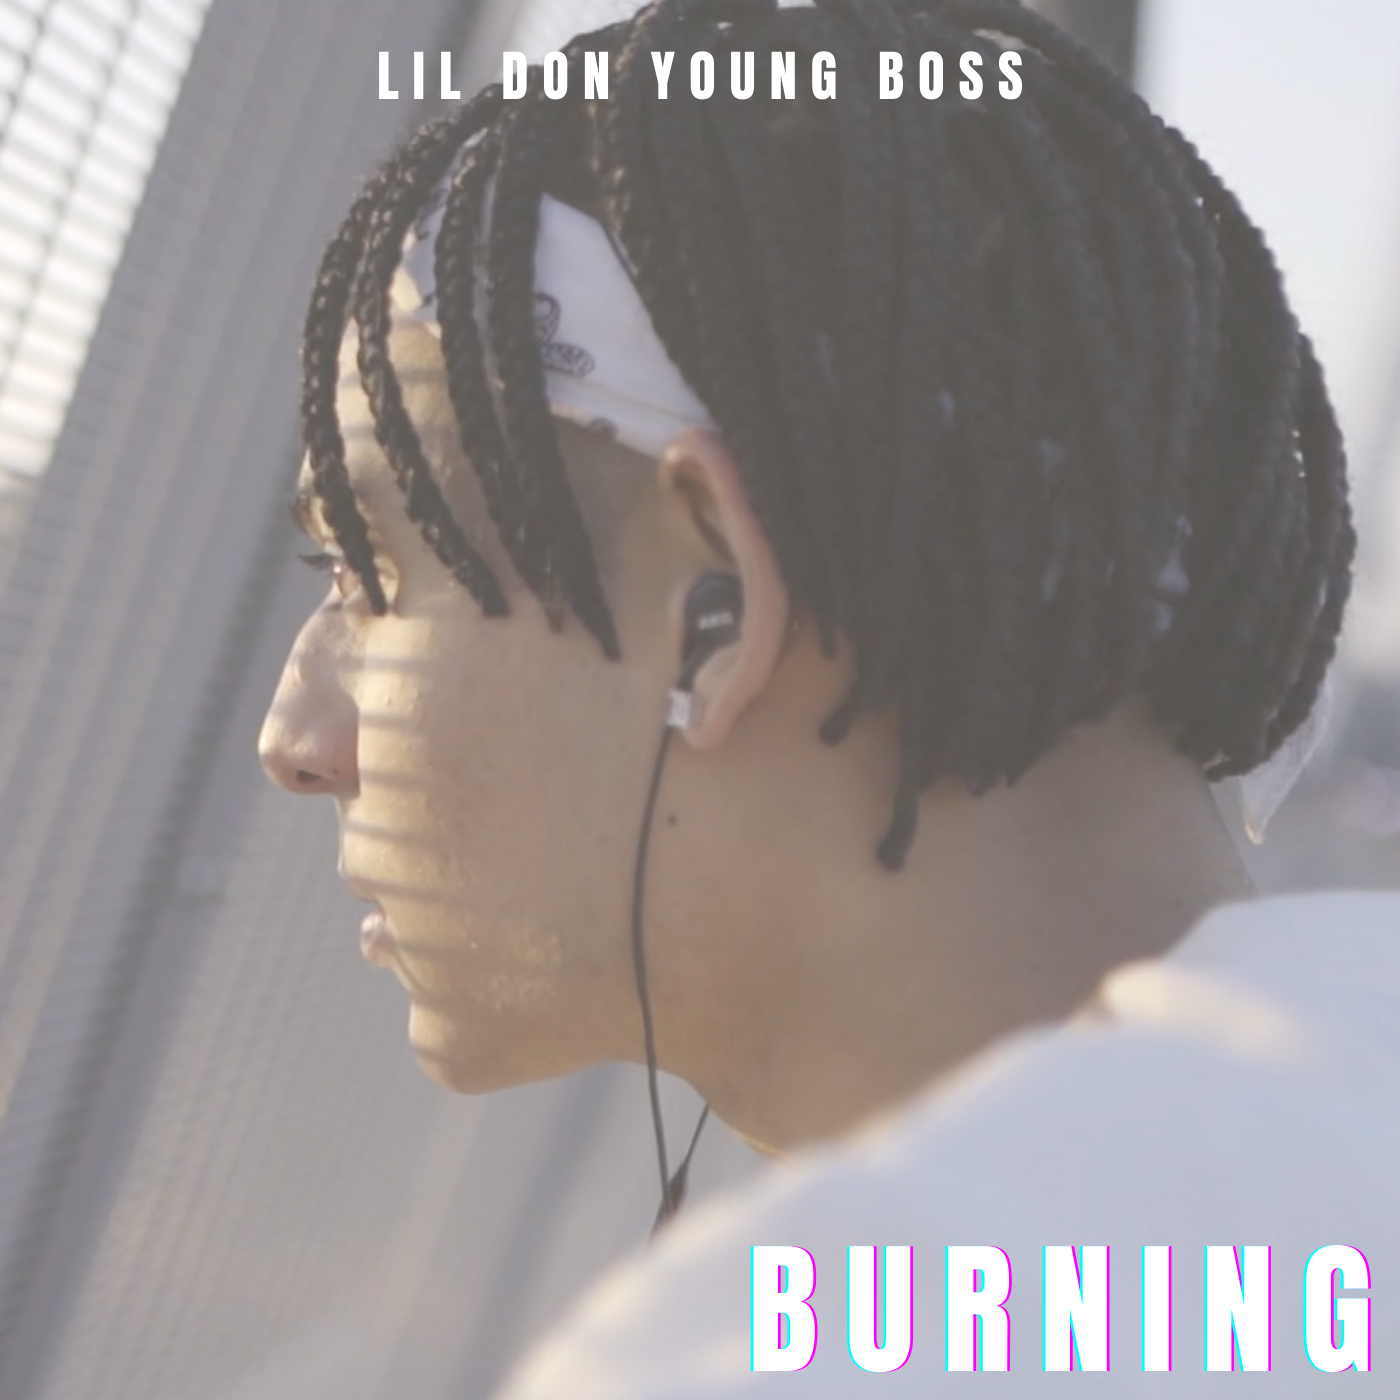 Lil don young boss Burning